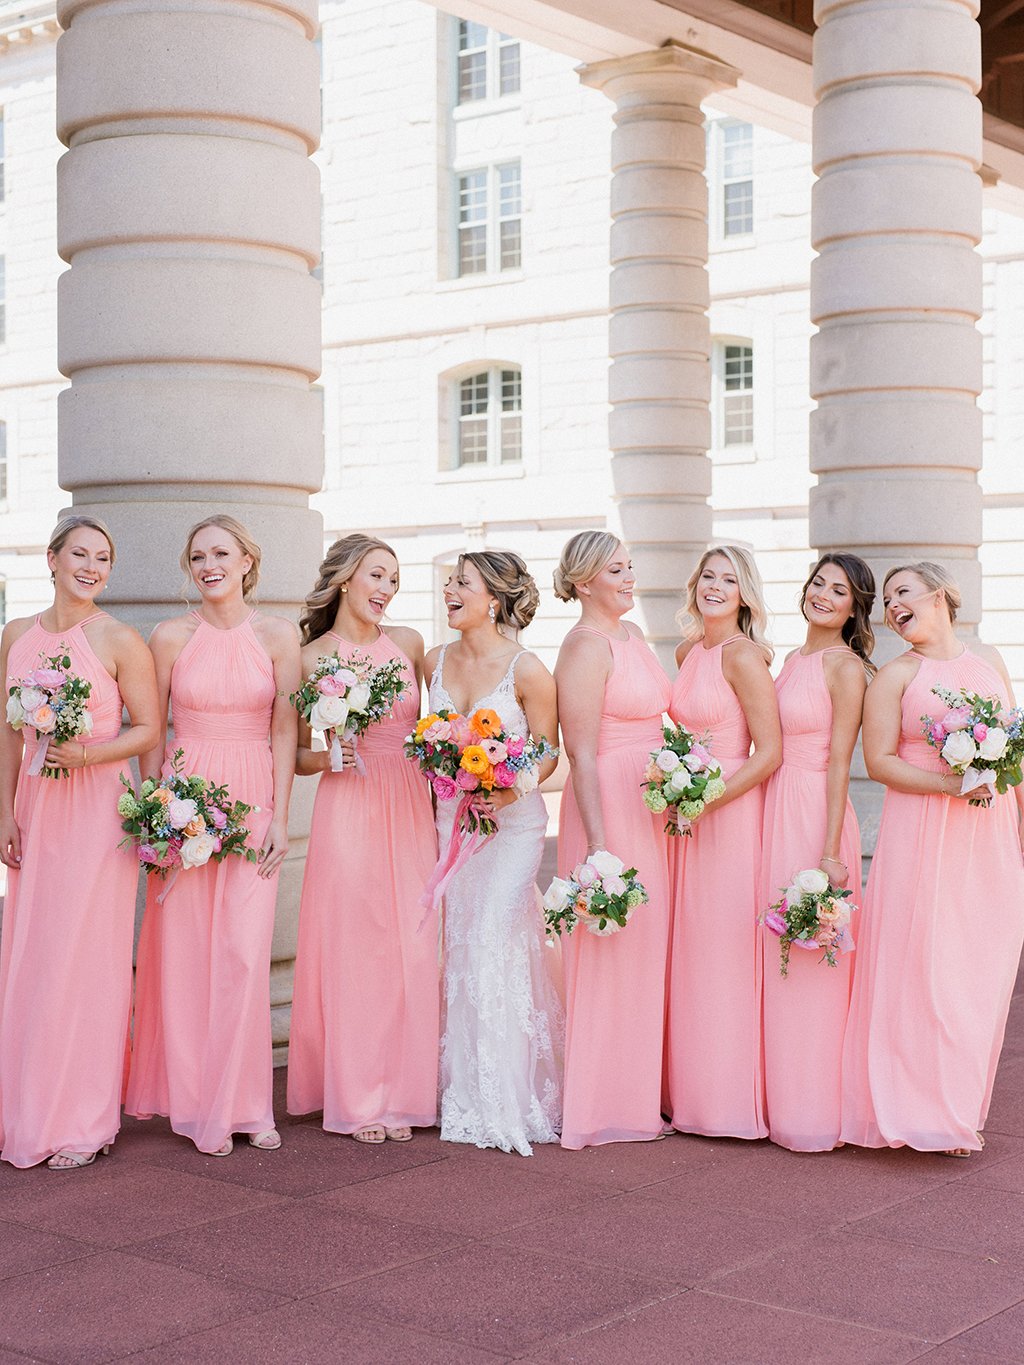 Bubblegum Pink Bridesmaids Dresses Added a Burst of Color to This